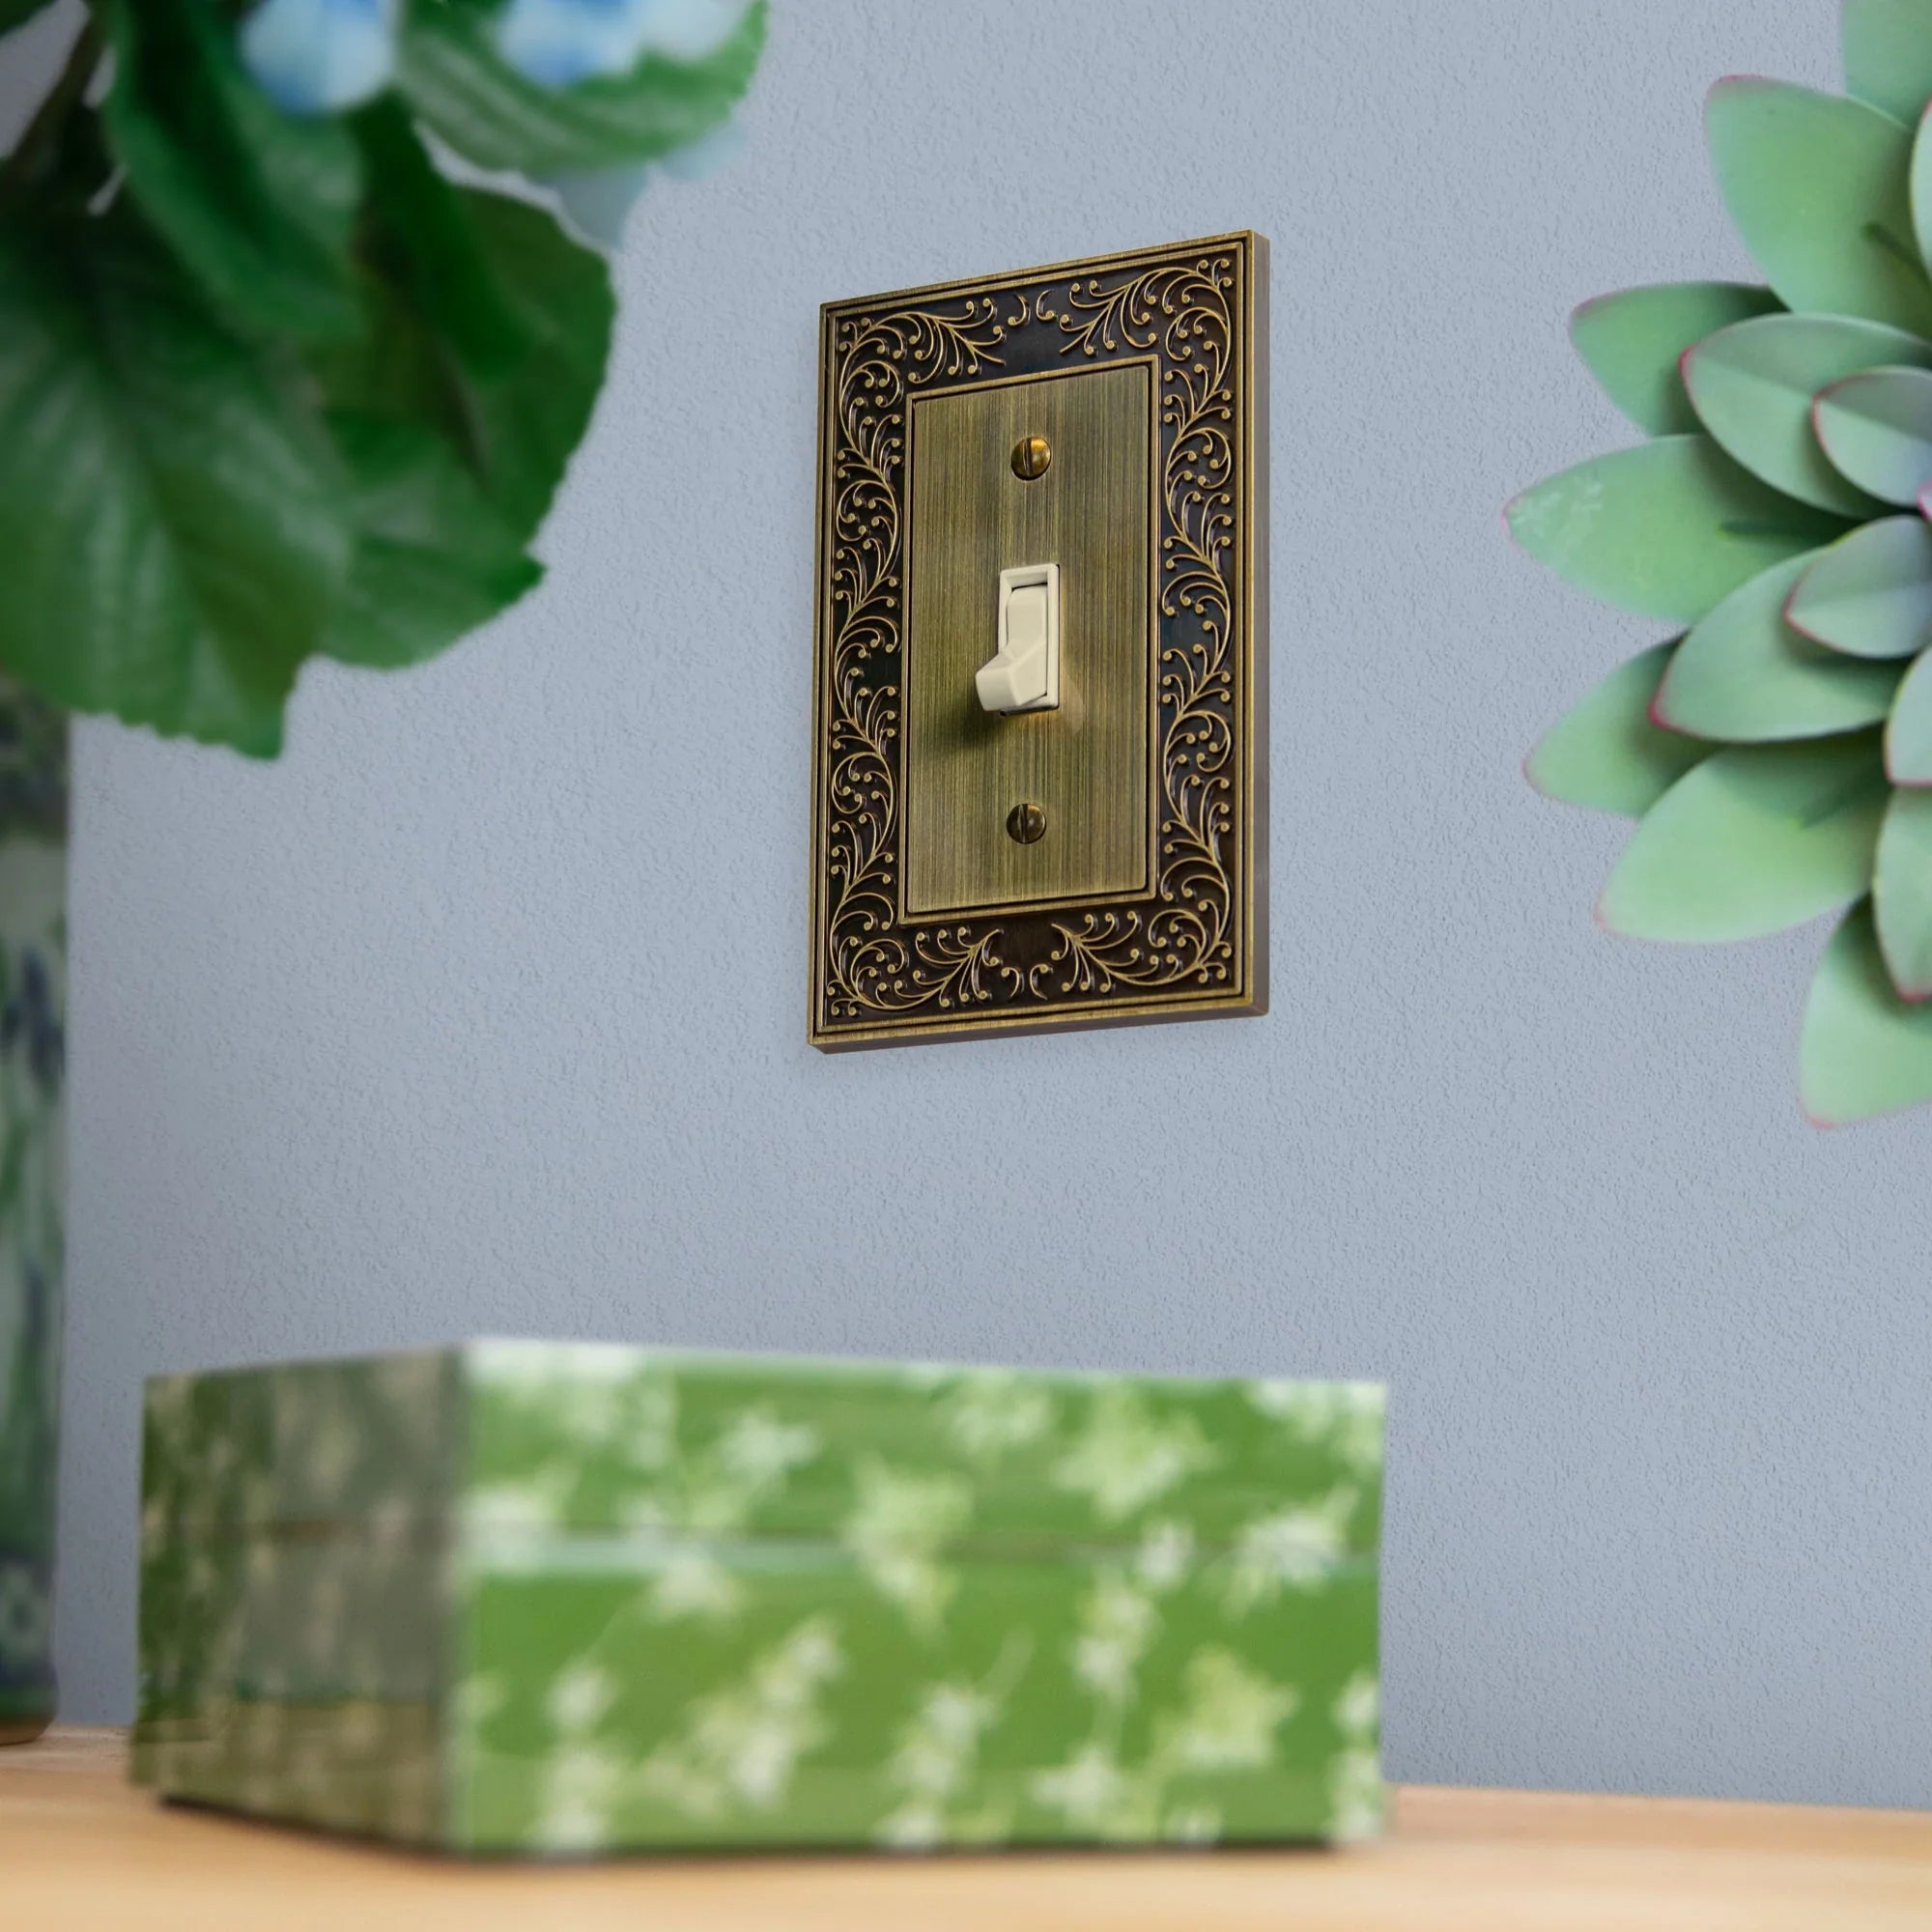 English Garden Brushed Brass Cast - 1 Cable Jack Wallplate